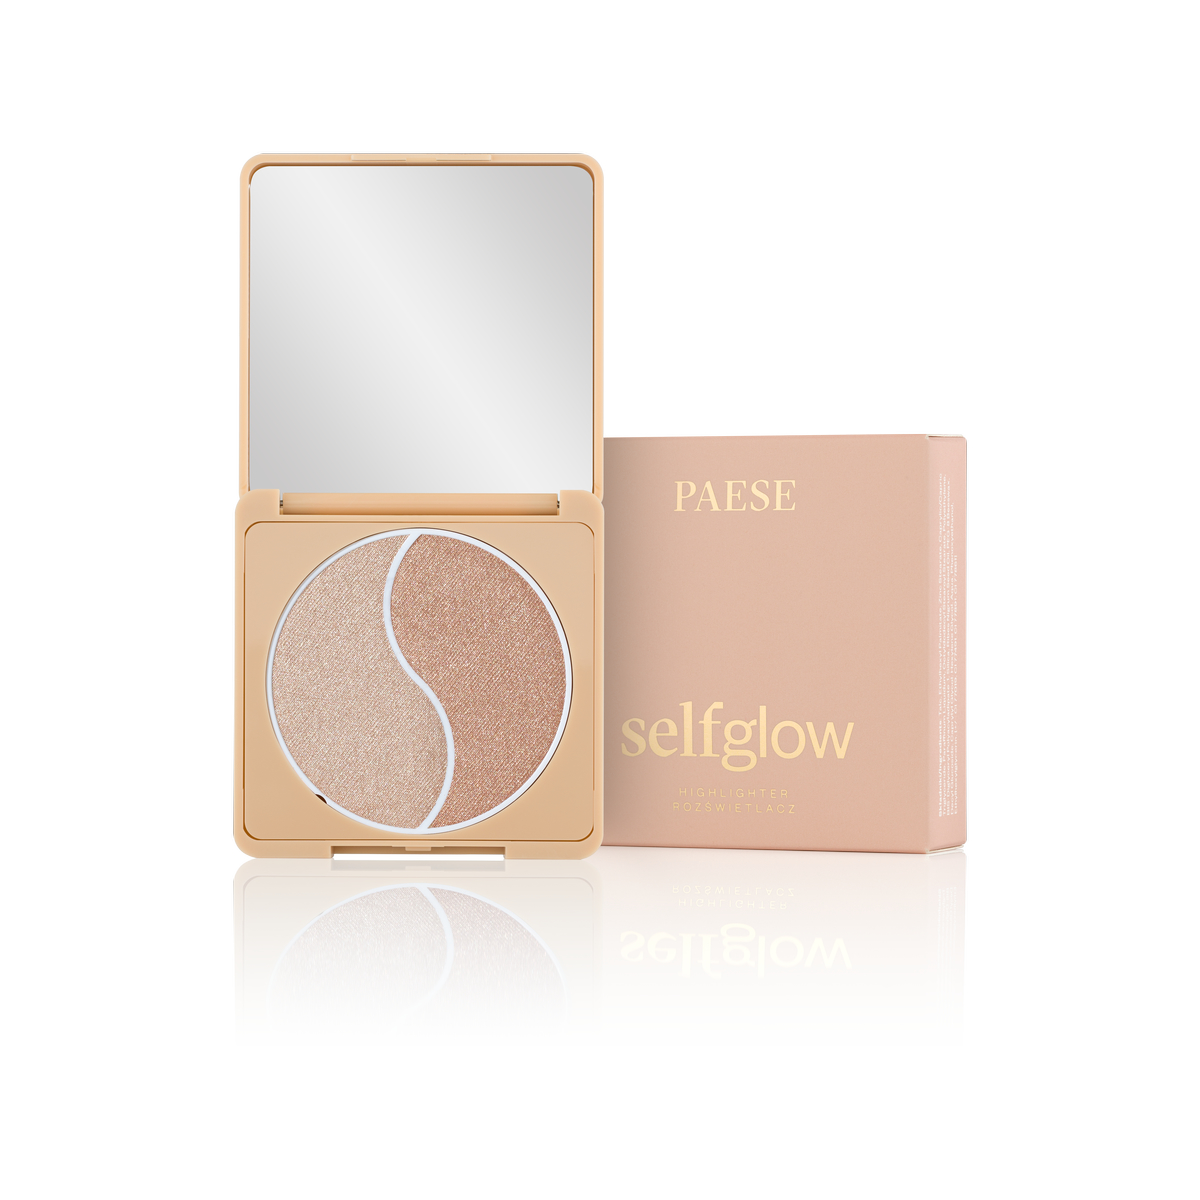 Selfglow Highlighter Box + Product result